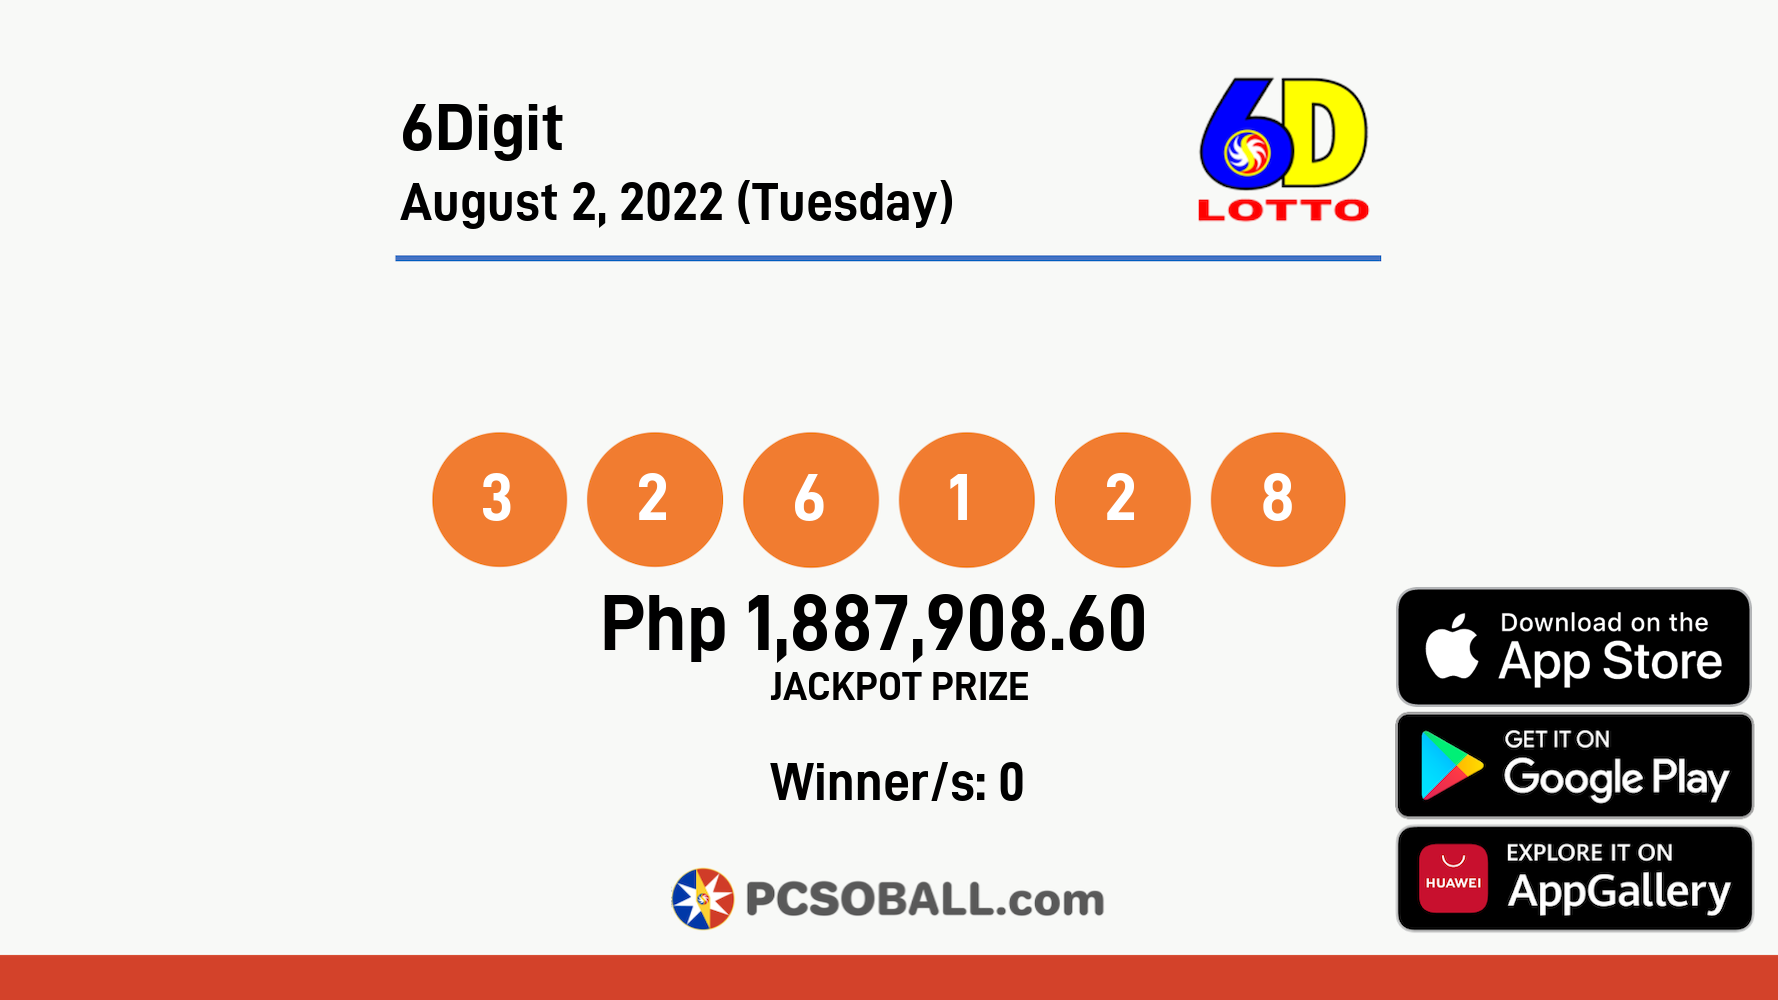 6Digit August 2, 2022 (Tuesday) Result